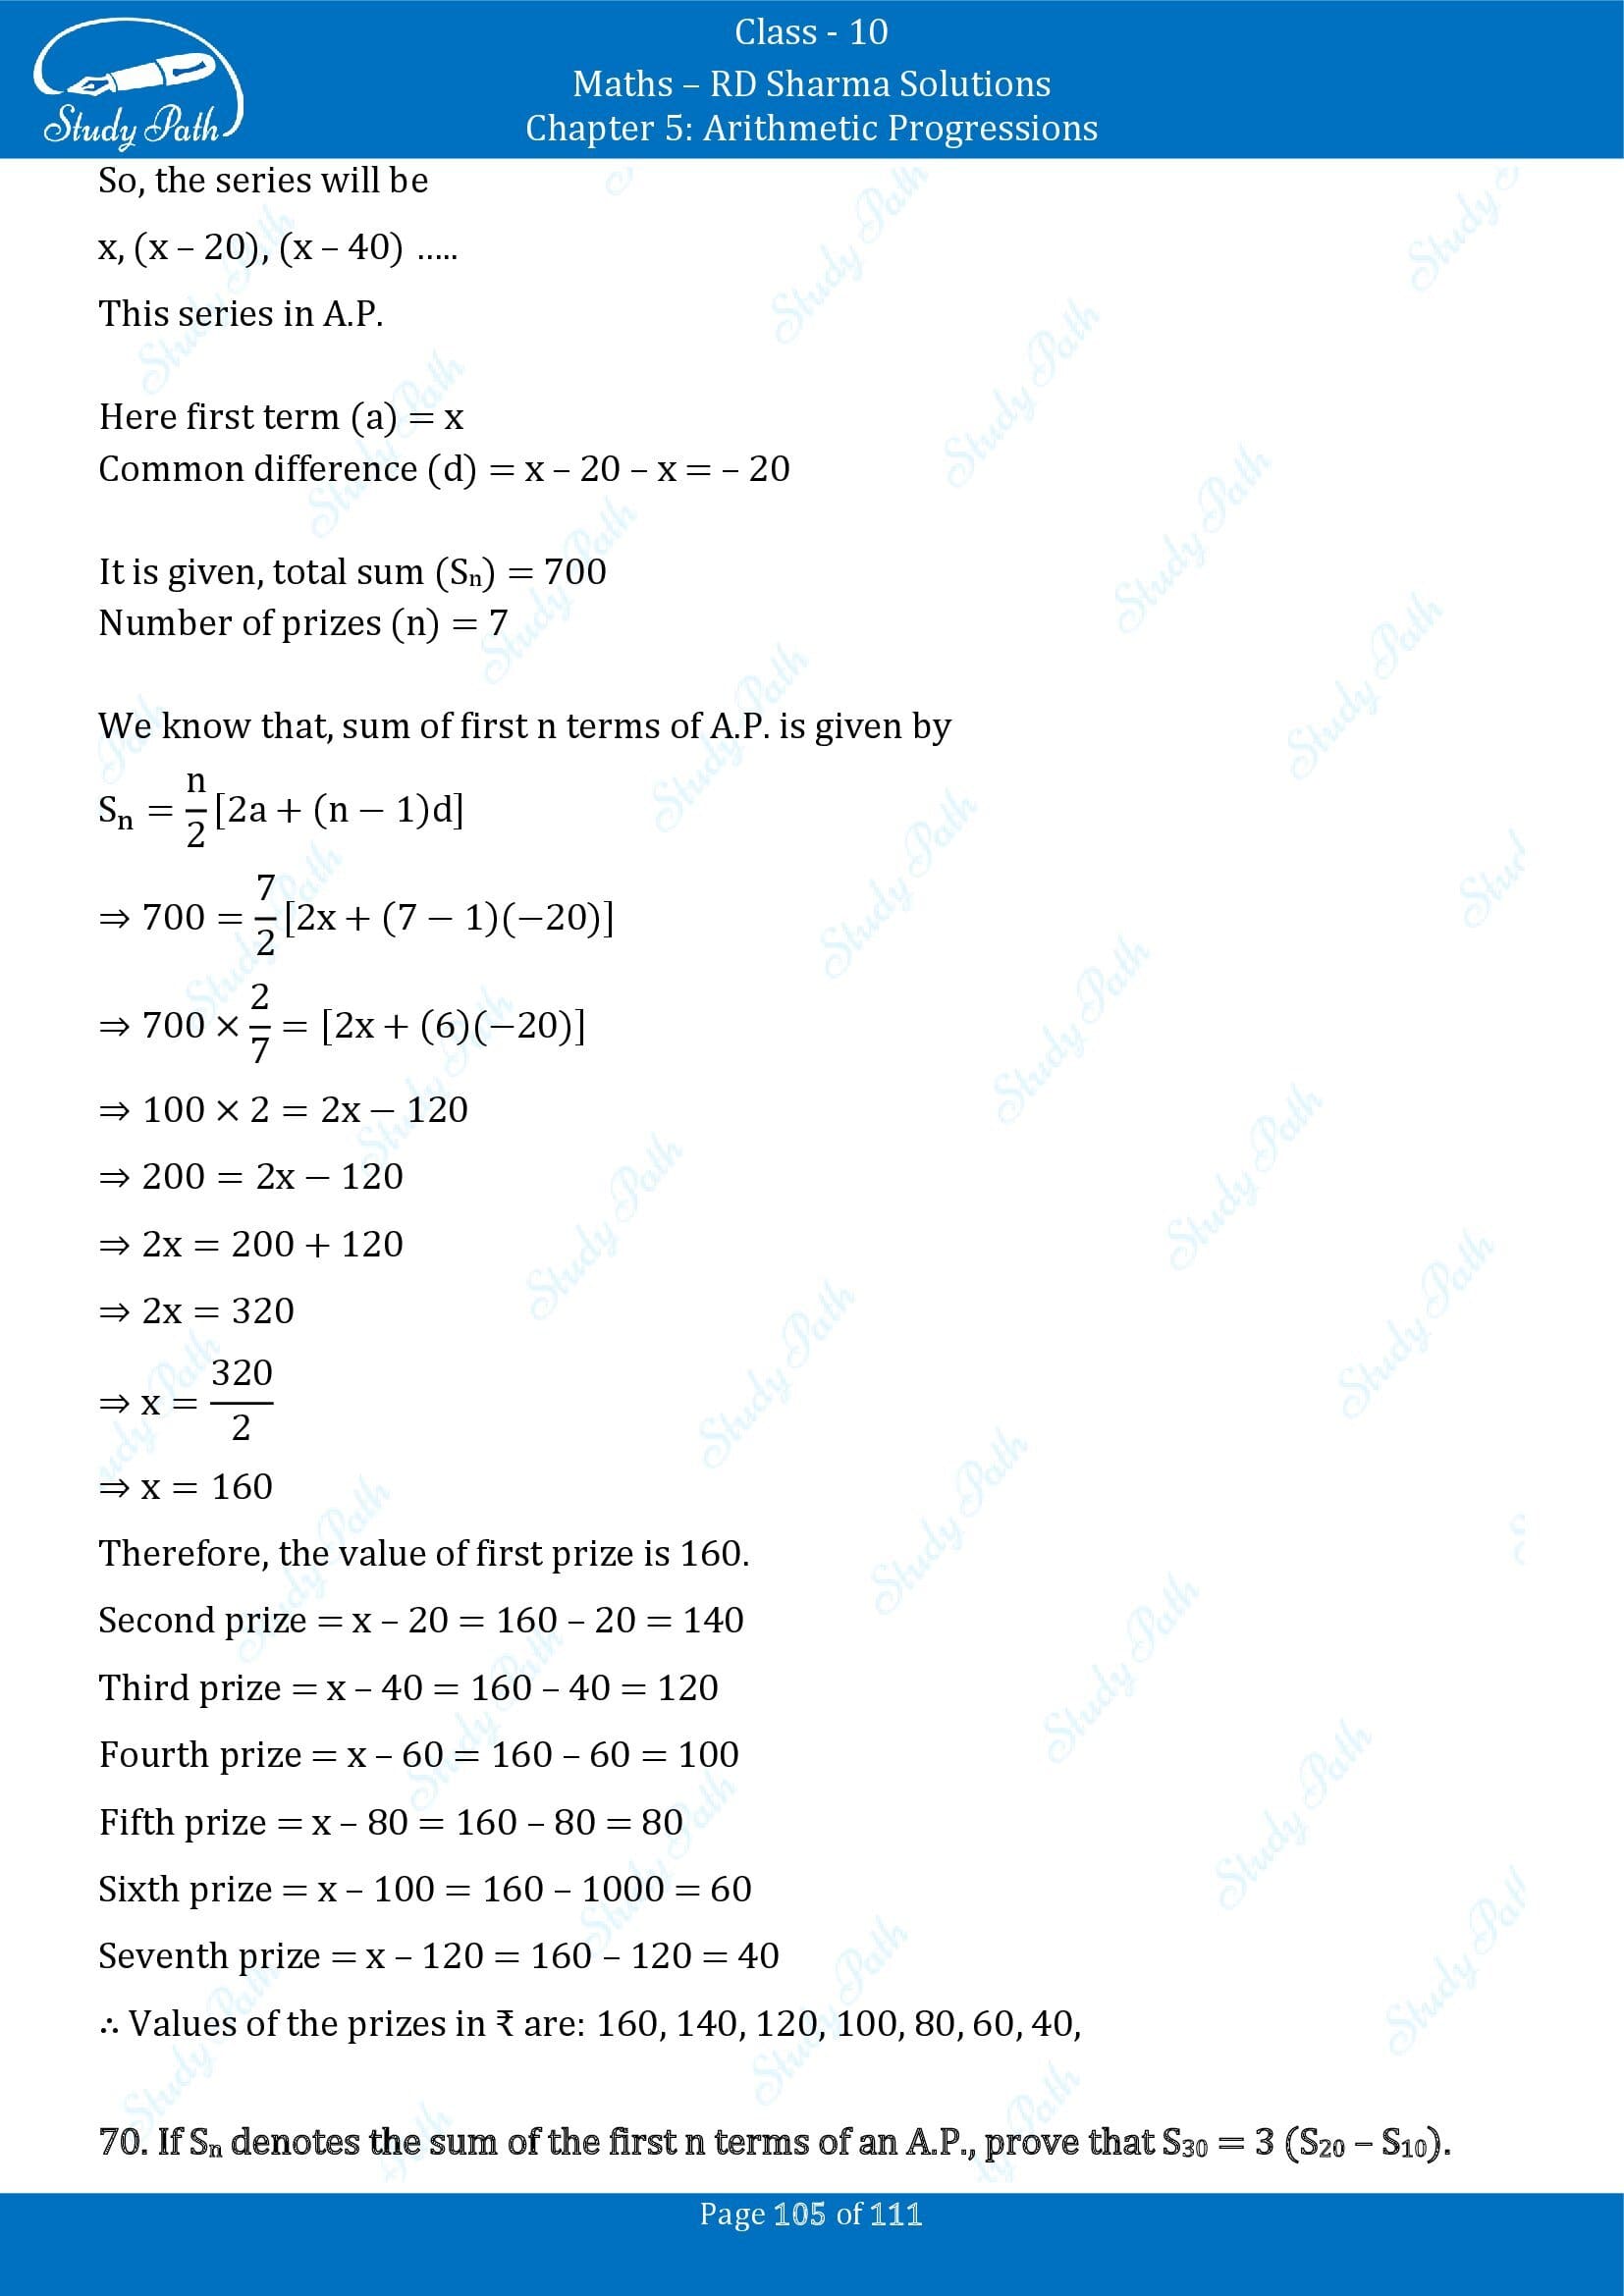 RD Sharma Solutions Class 10 Chapter 5 Arithmetic Progressions Exercise 5.6 00105